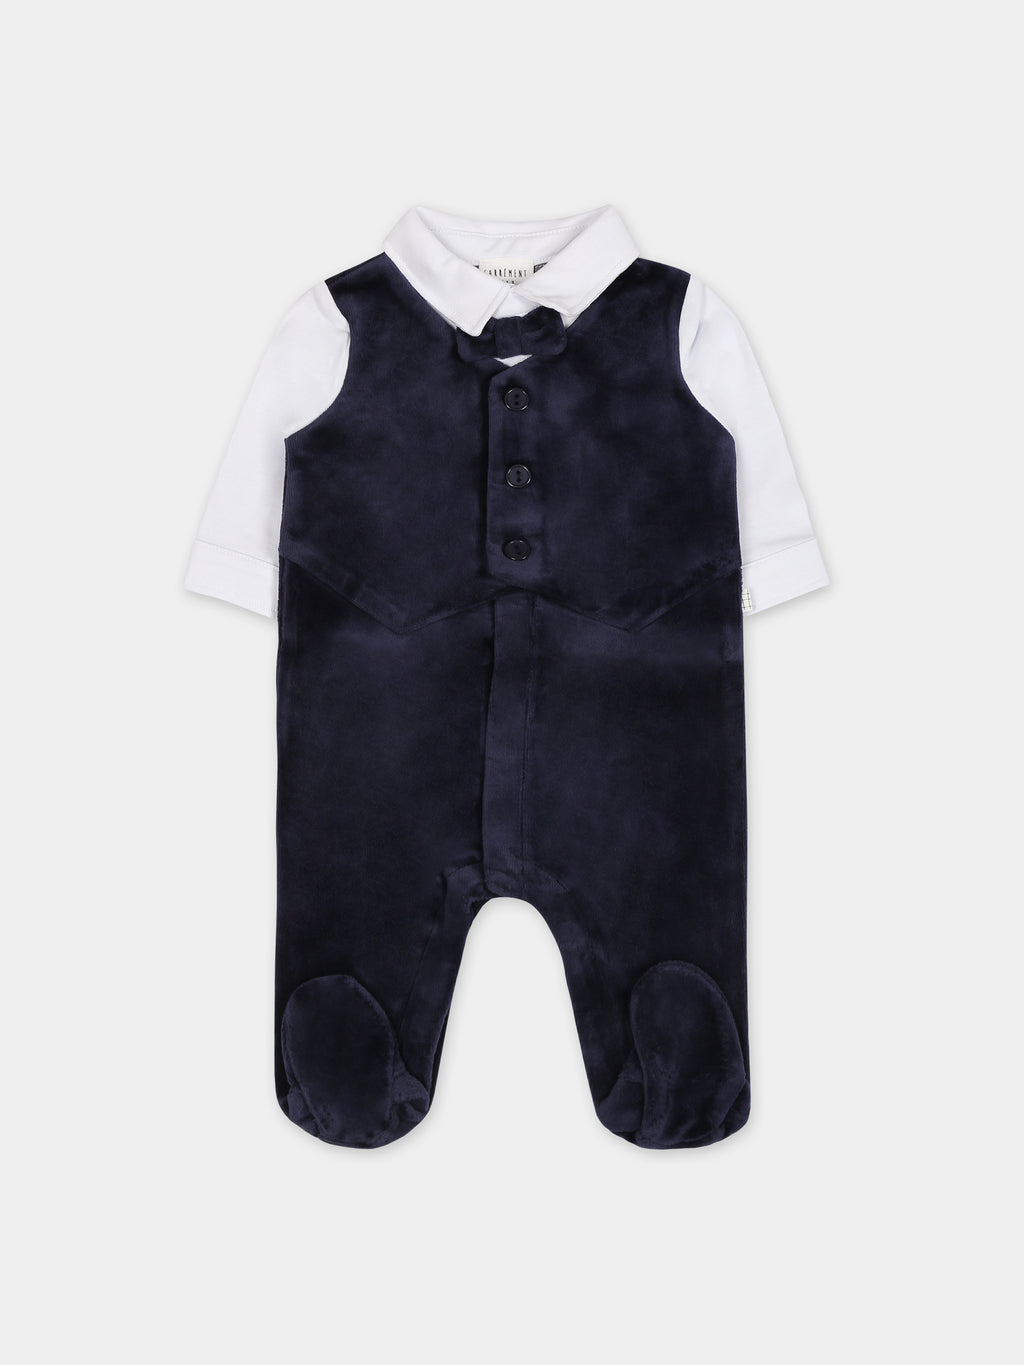 Blue babygrow for baby boy with bow tie